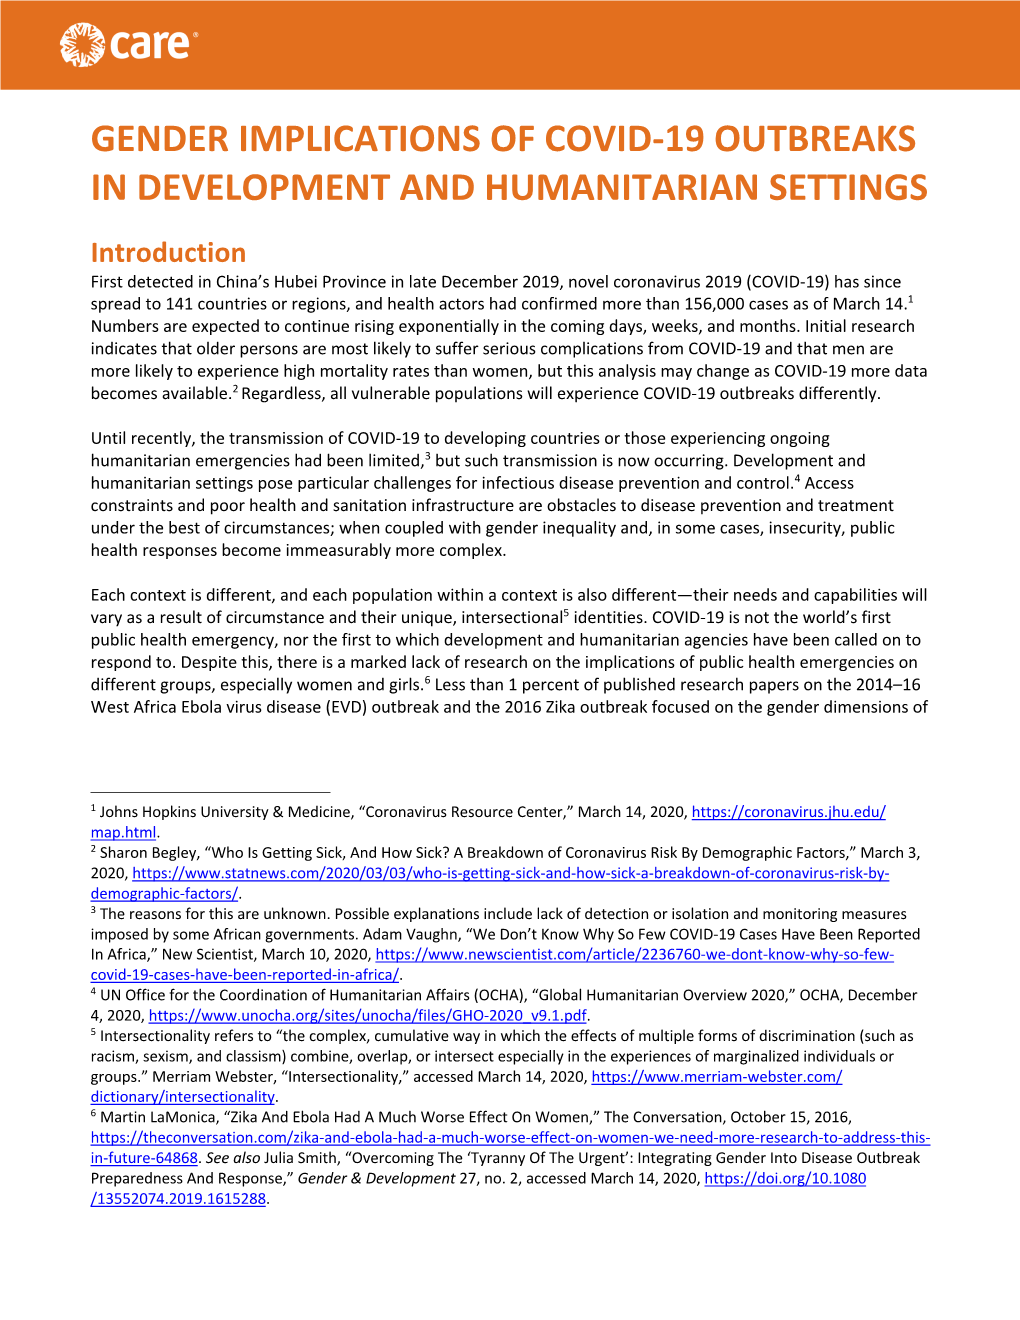 Gender Implications of Covid-19 Outbreaks in Development and Humanitarian Settings